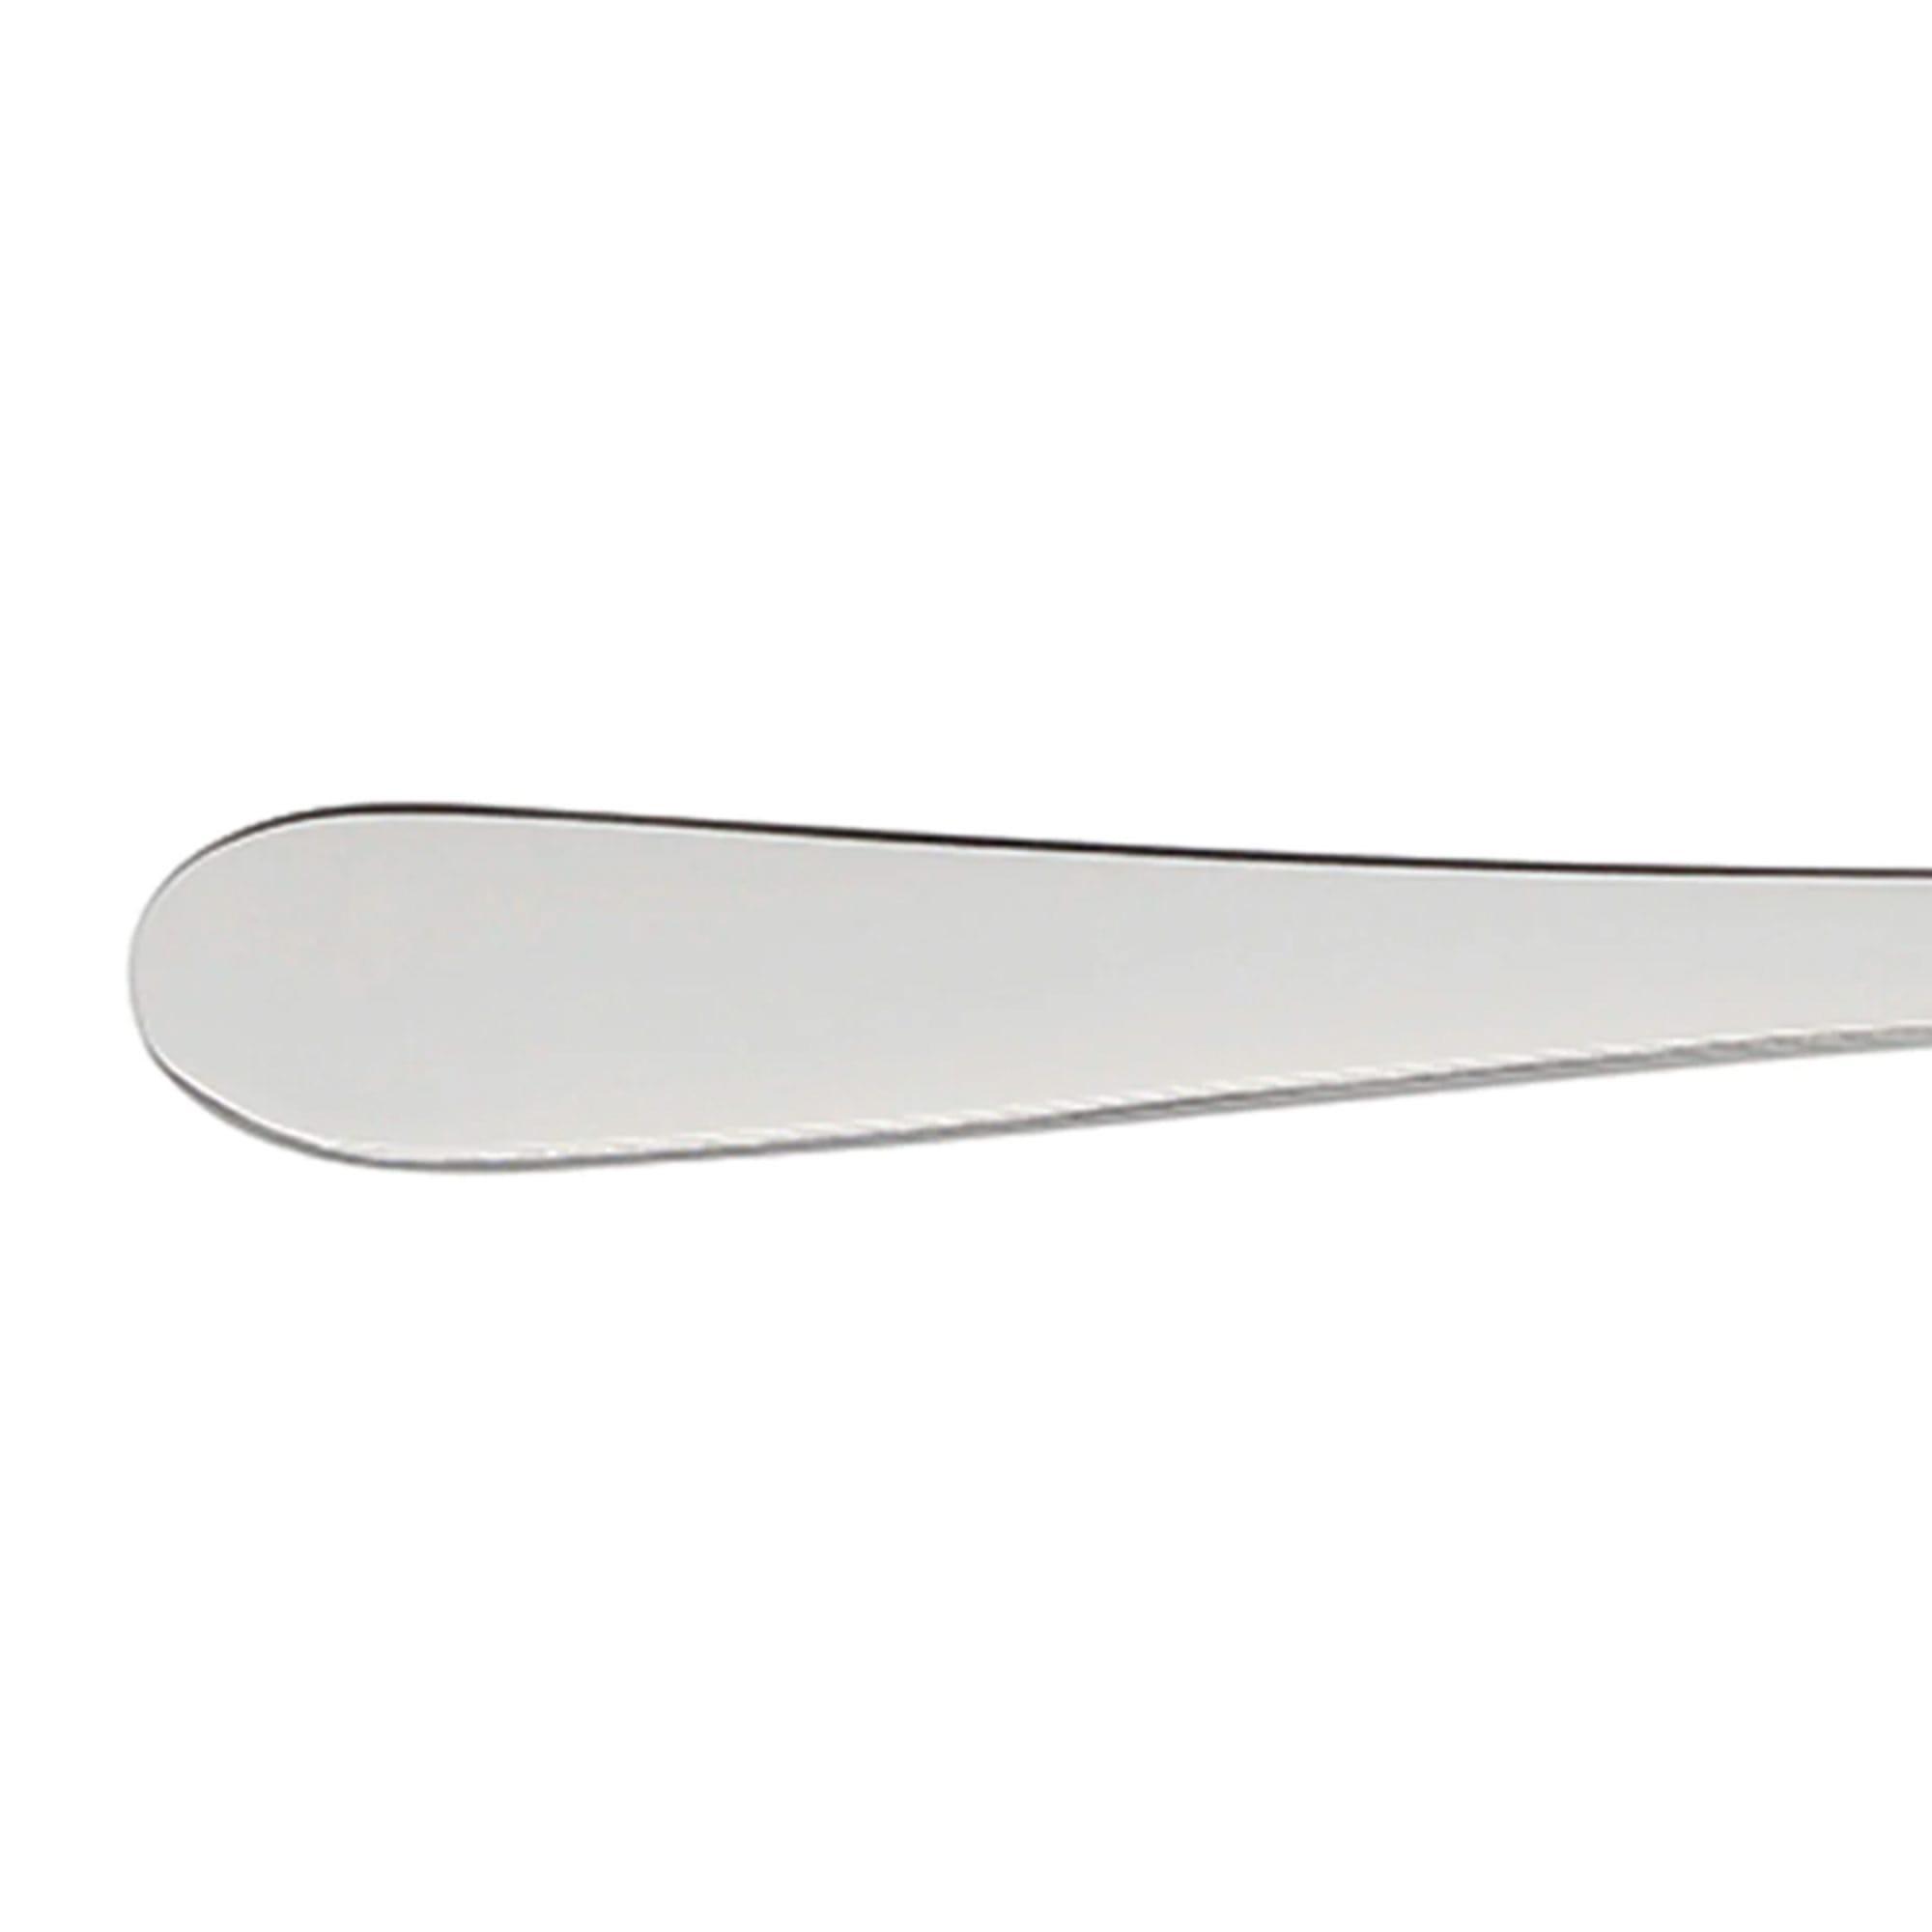 Stanley Rogers Albany Rice Serving Spoon Image 4